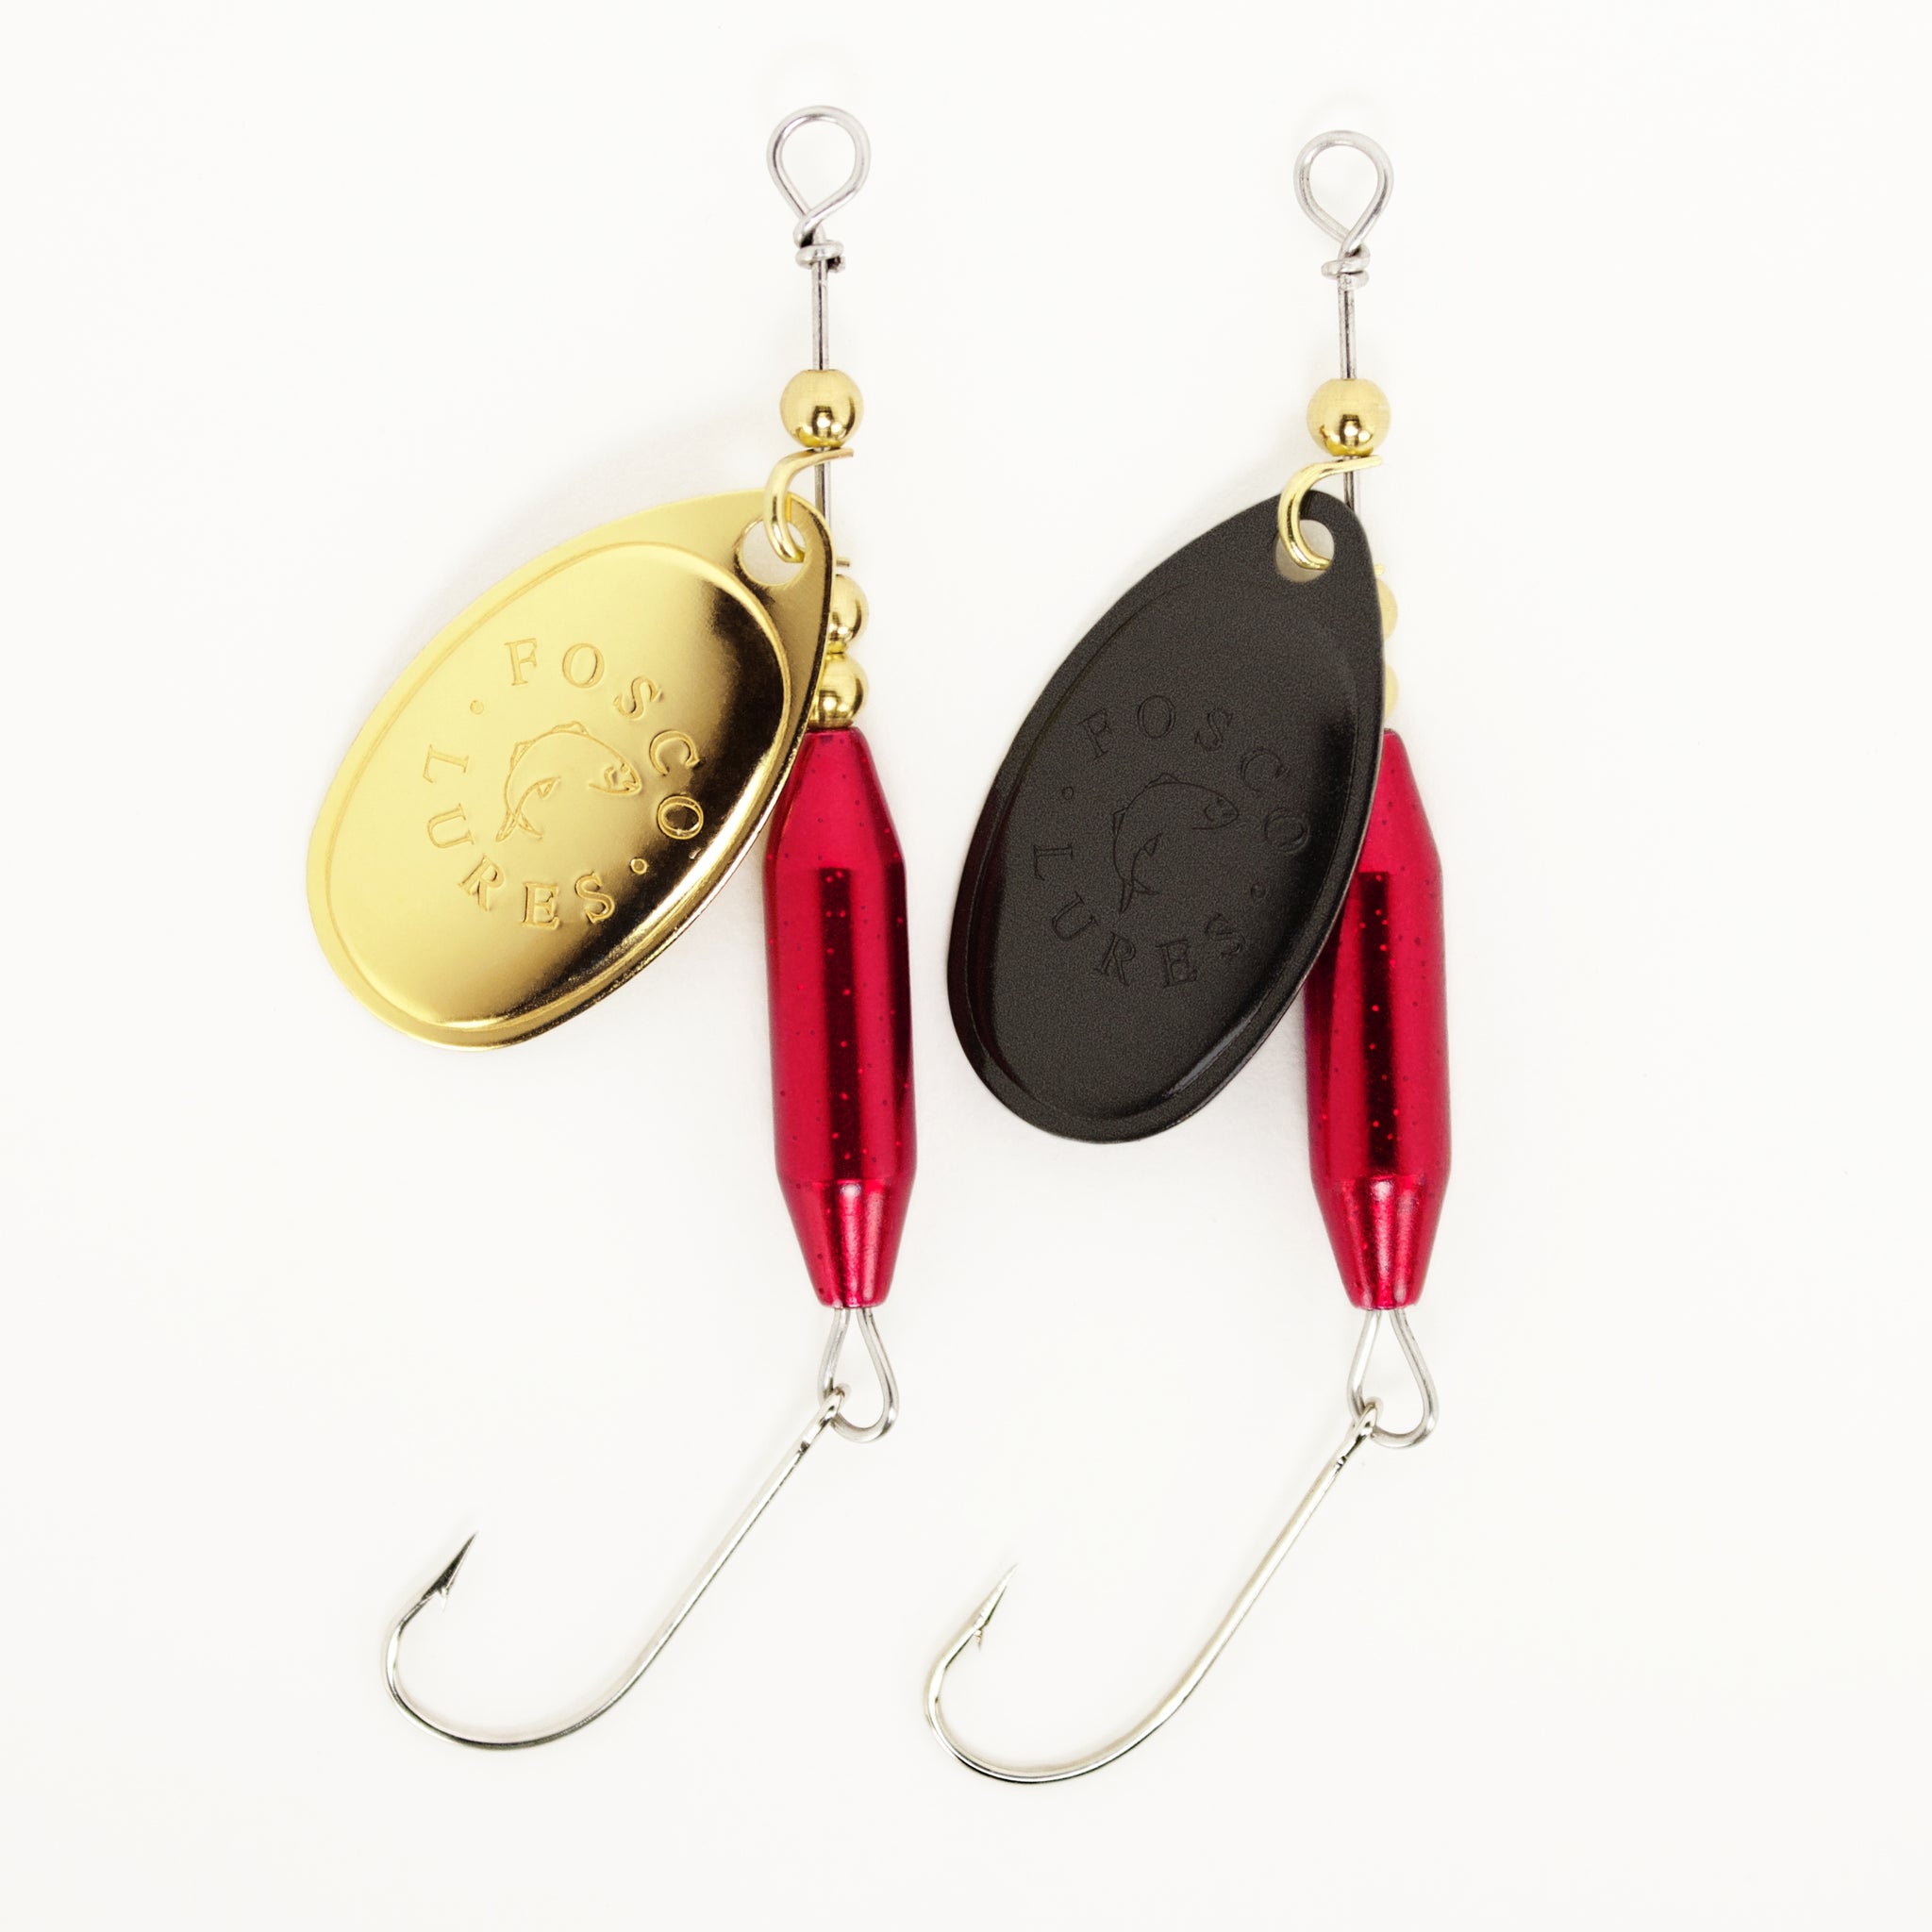 Fosco Handmade Fishing Lure • Pigeon Blood Red Inline Spinner • Single Hook  • Made By Hand In Canada – Fosco Fishing Lures